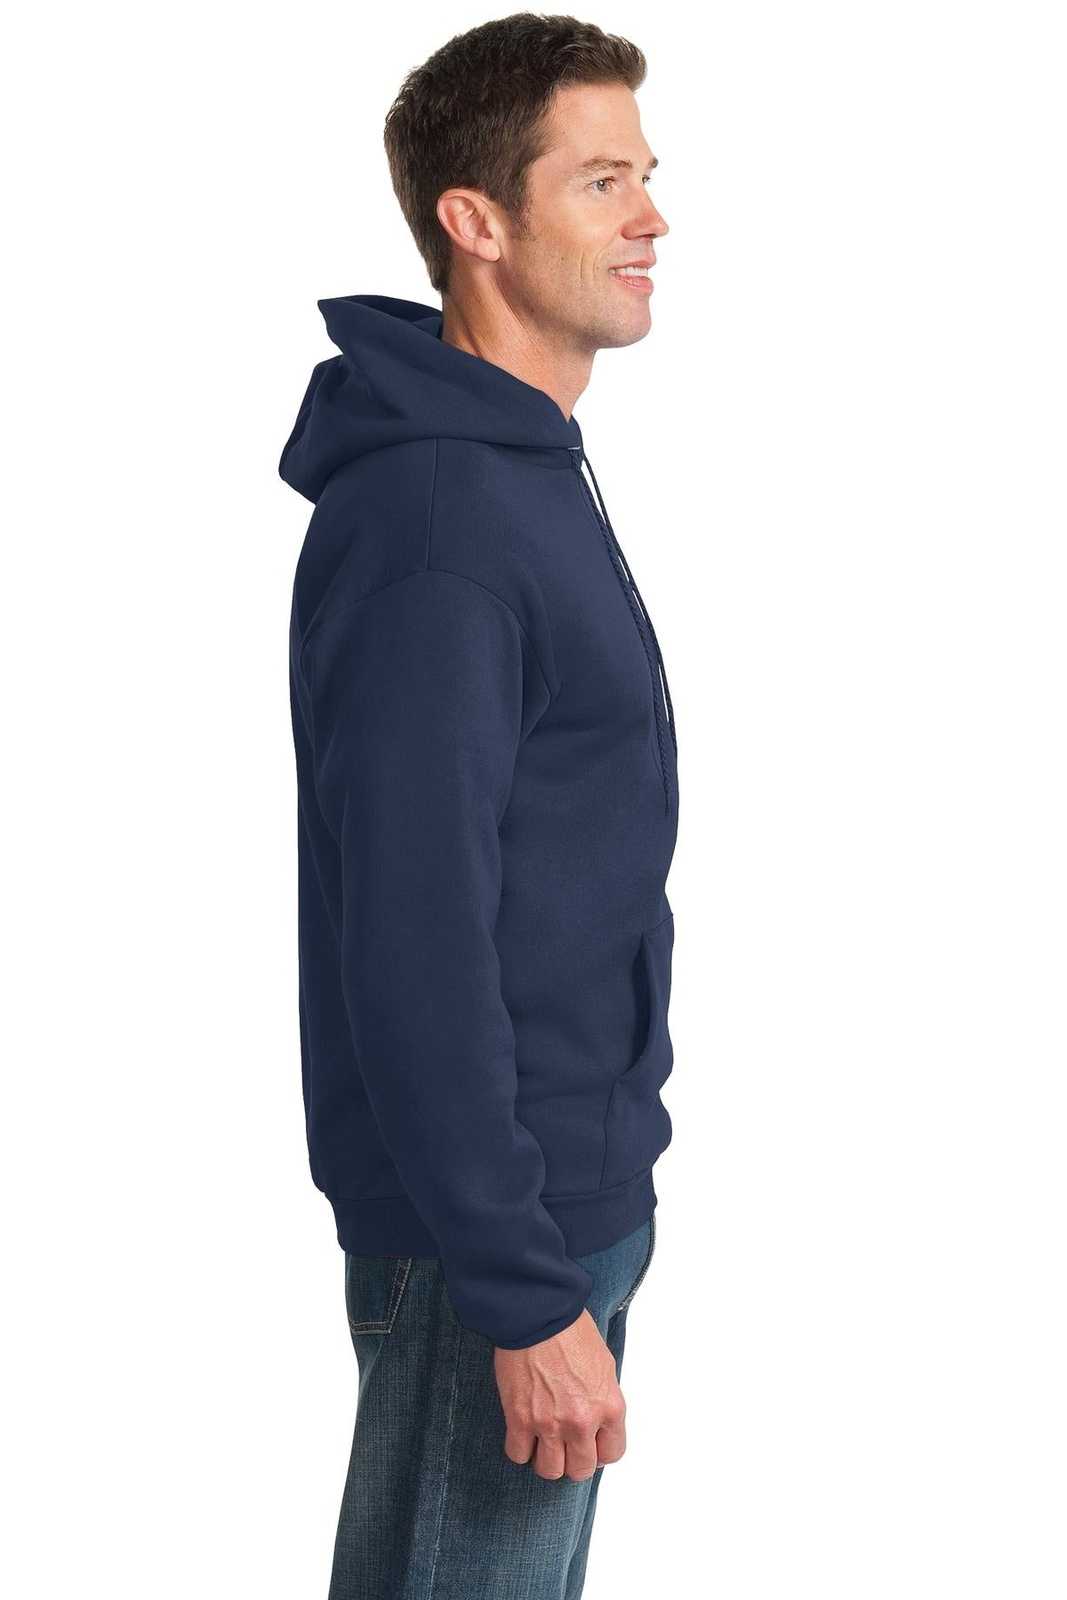 Port &amp; Company PC90H Essential Fleece Pullover Hooded Sweatshirt - Navy - HIT a Double - 3